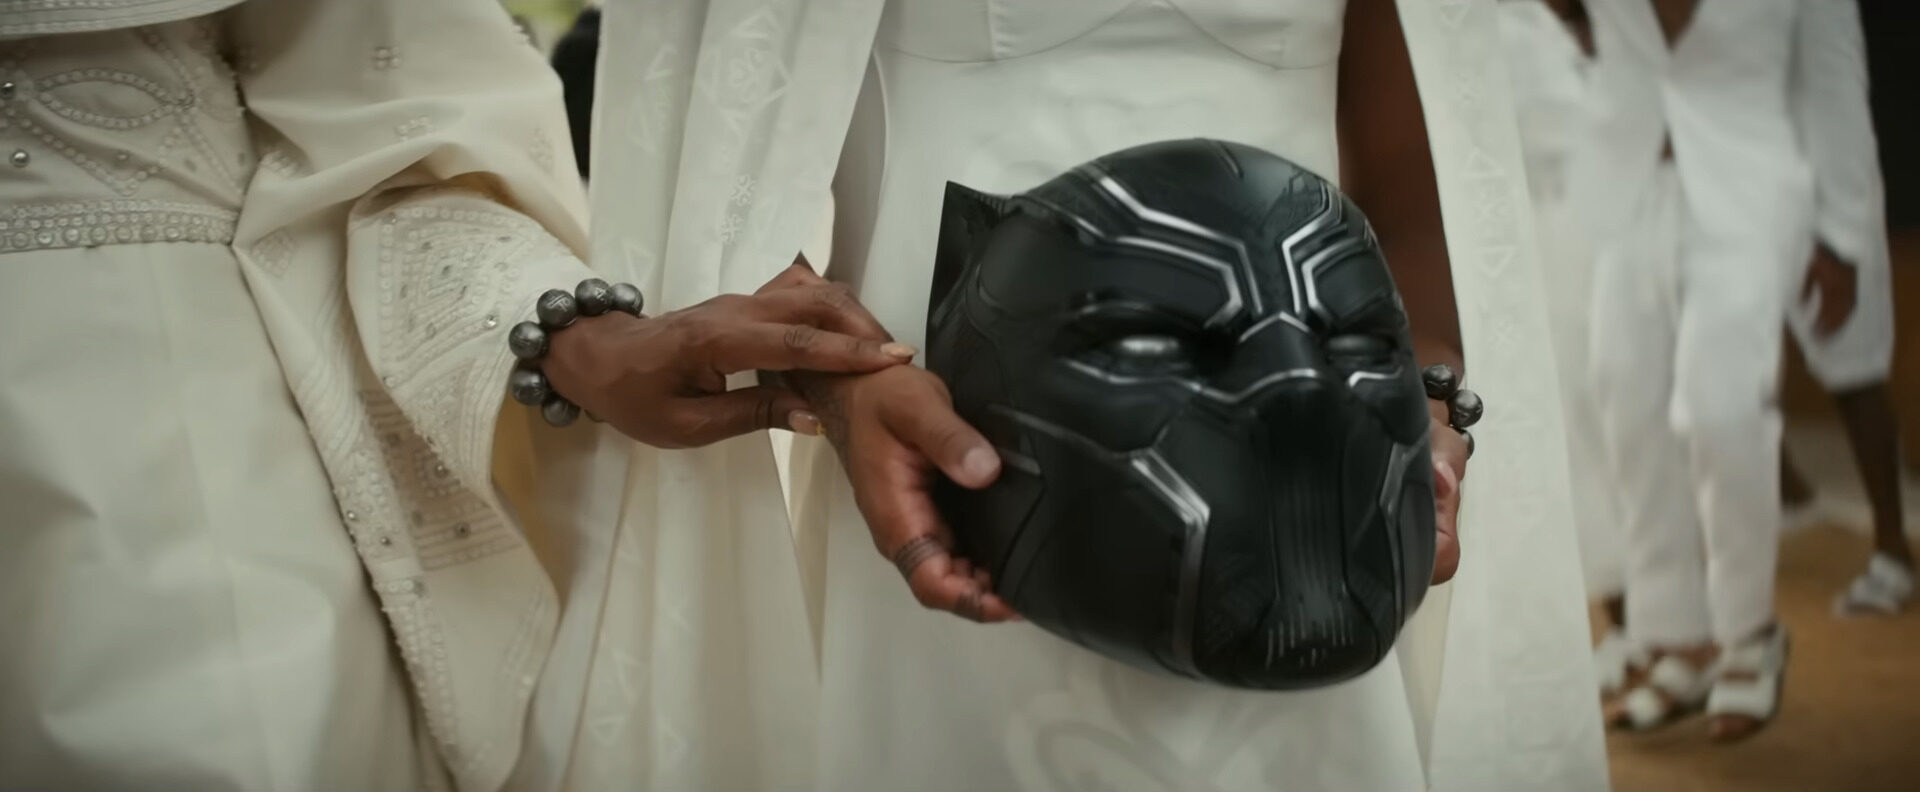 The Black Panther is no more in 'Black Panther: Wakanda Forever' (2022)